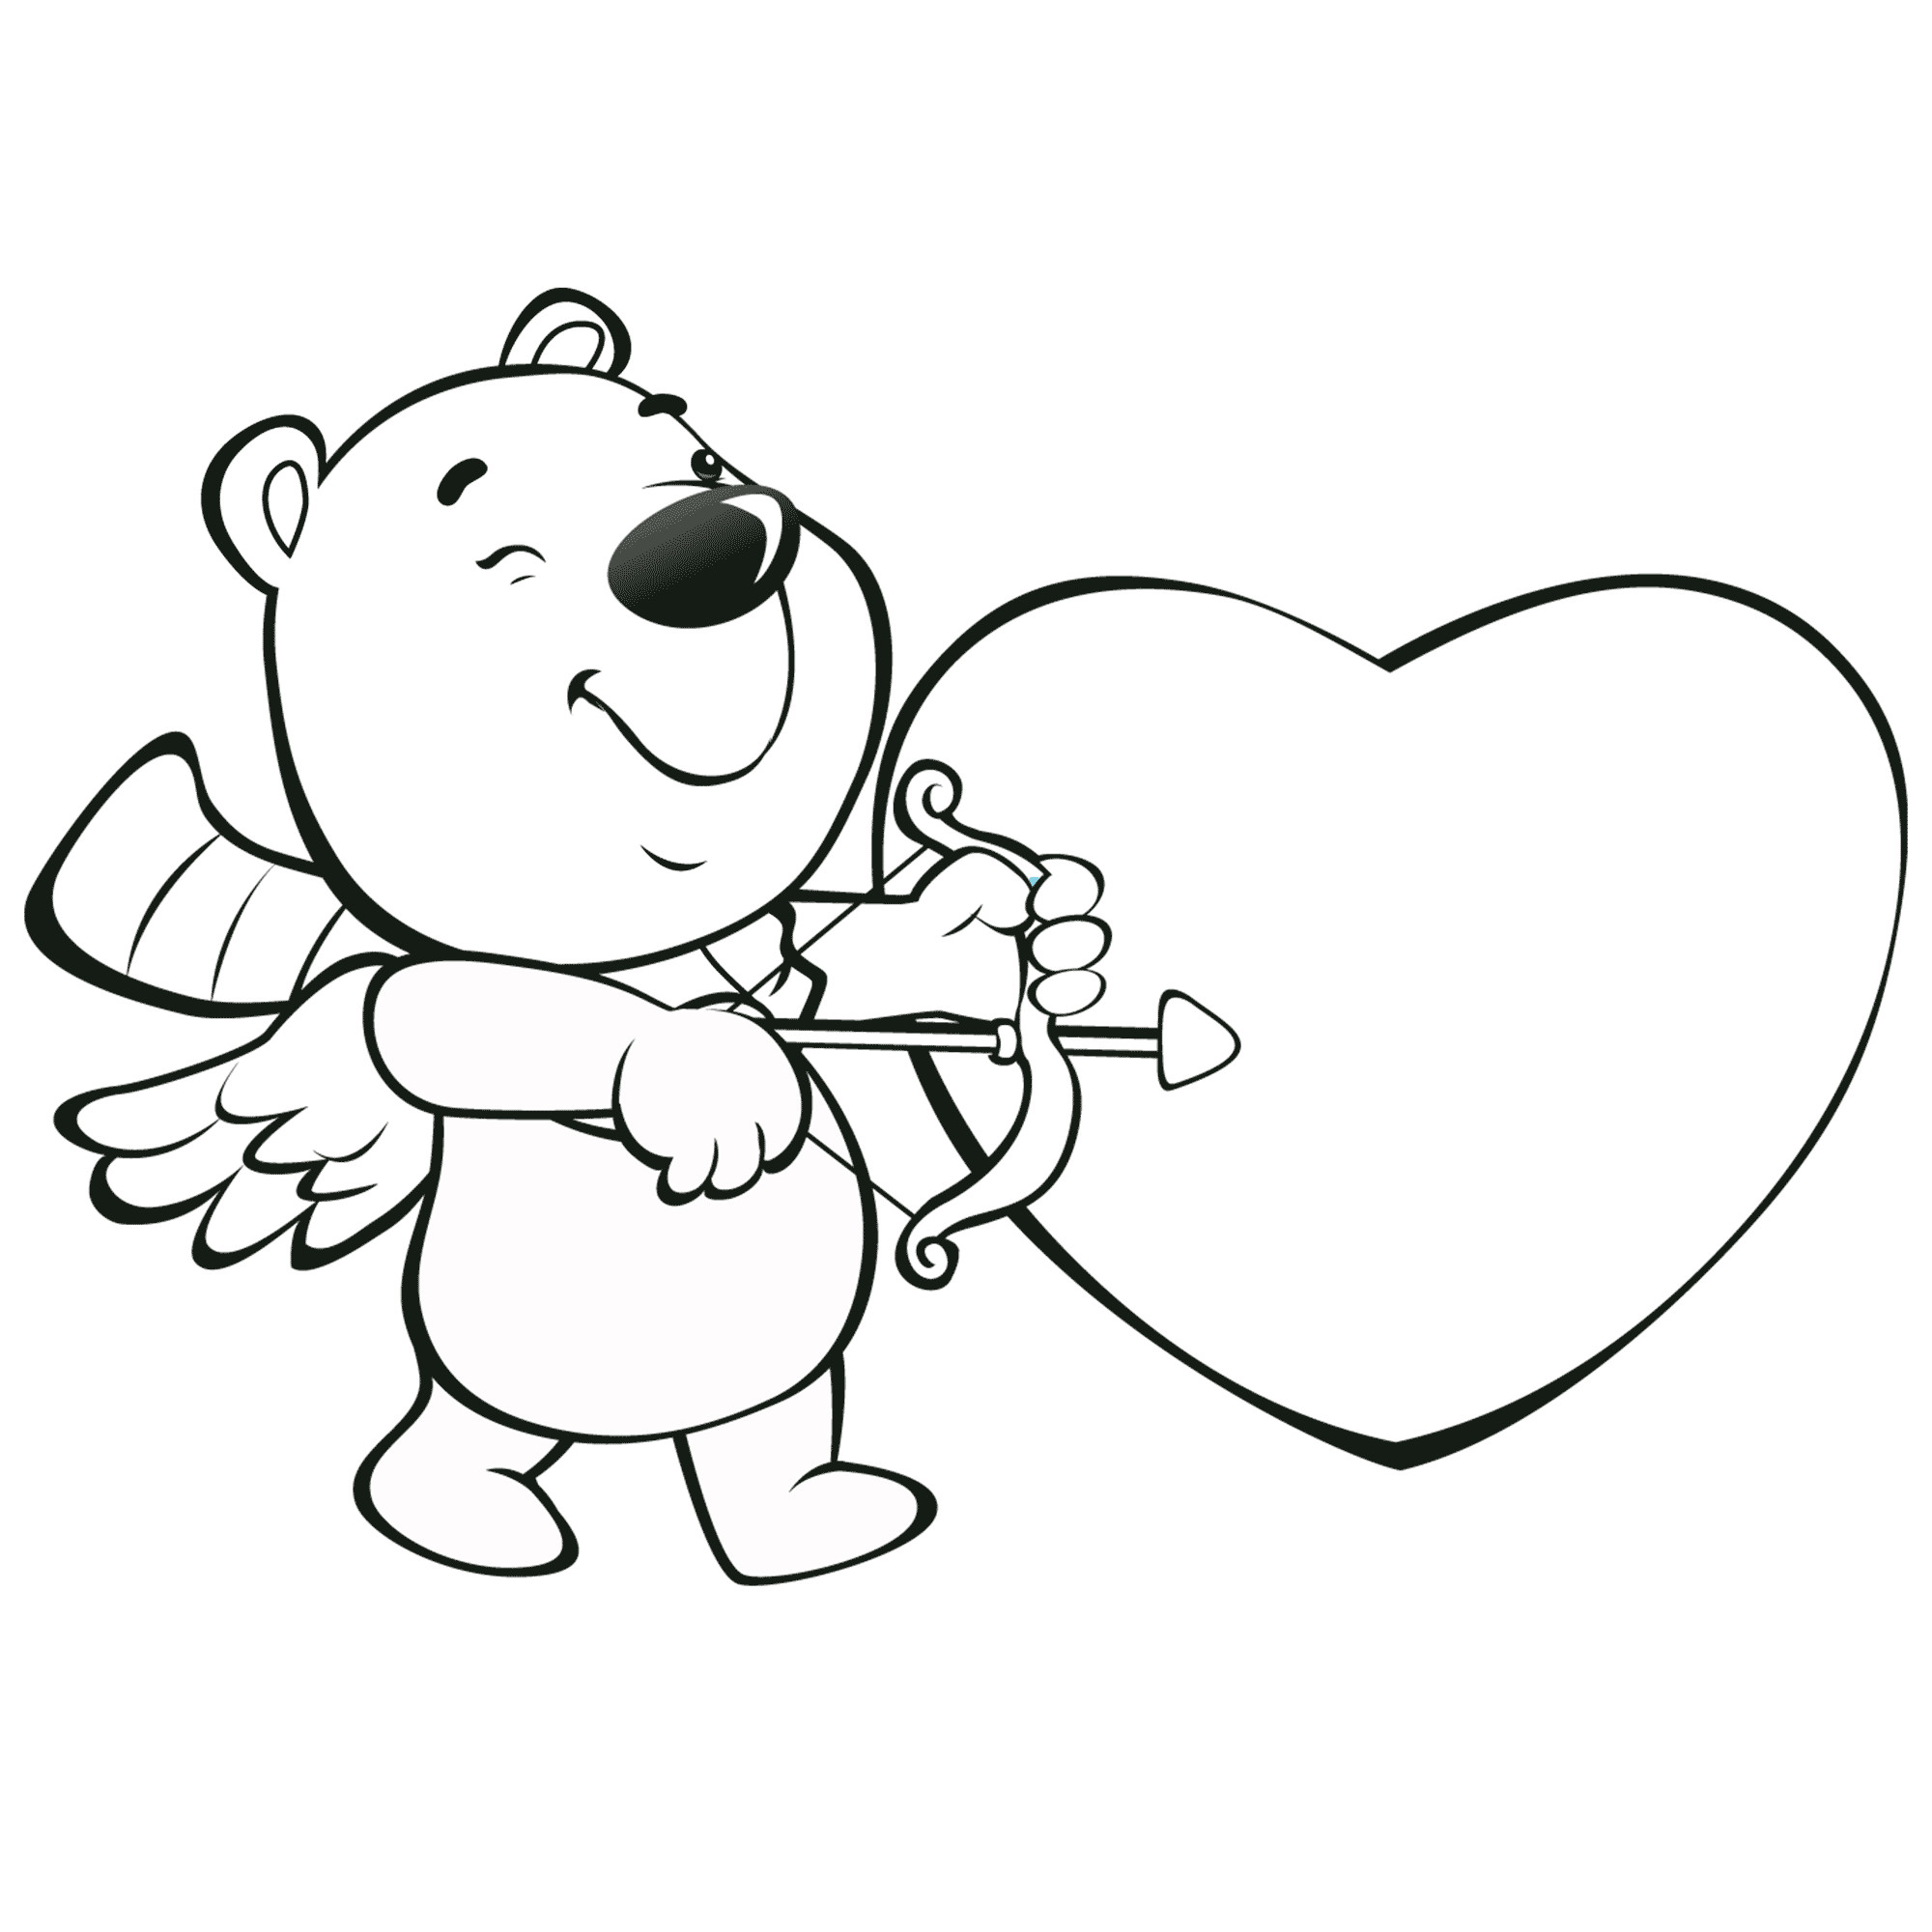 Valentine Coloring Sheets Free Printable
 Valentine Coloring Pages Best Coloring Pages For Kids